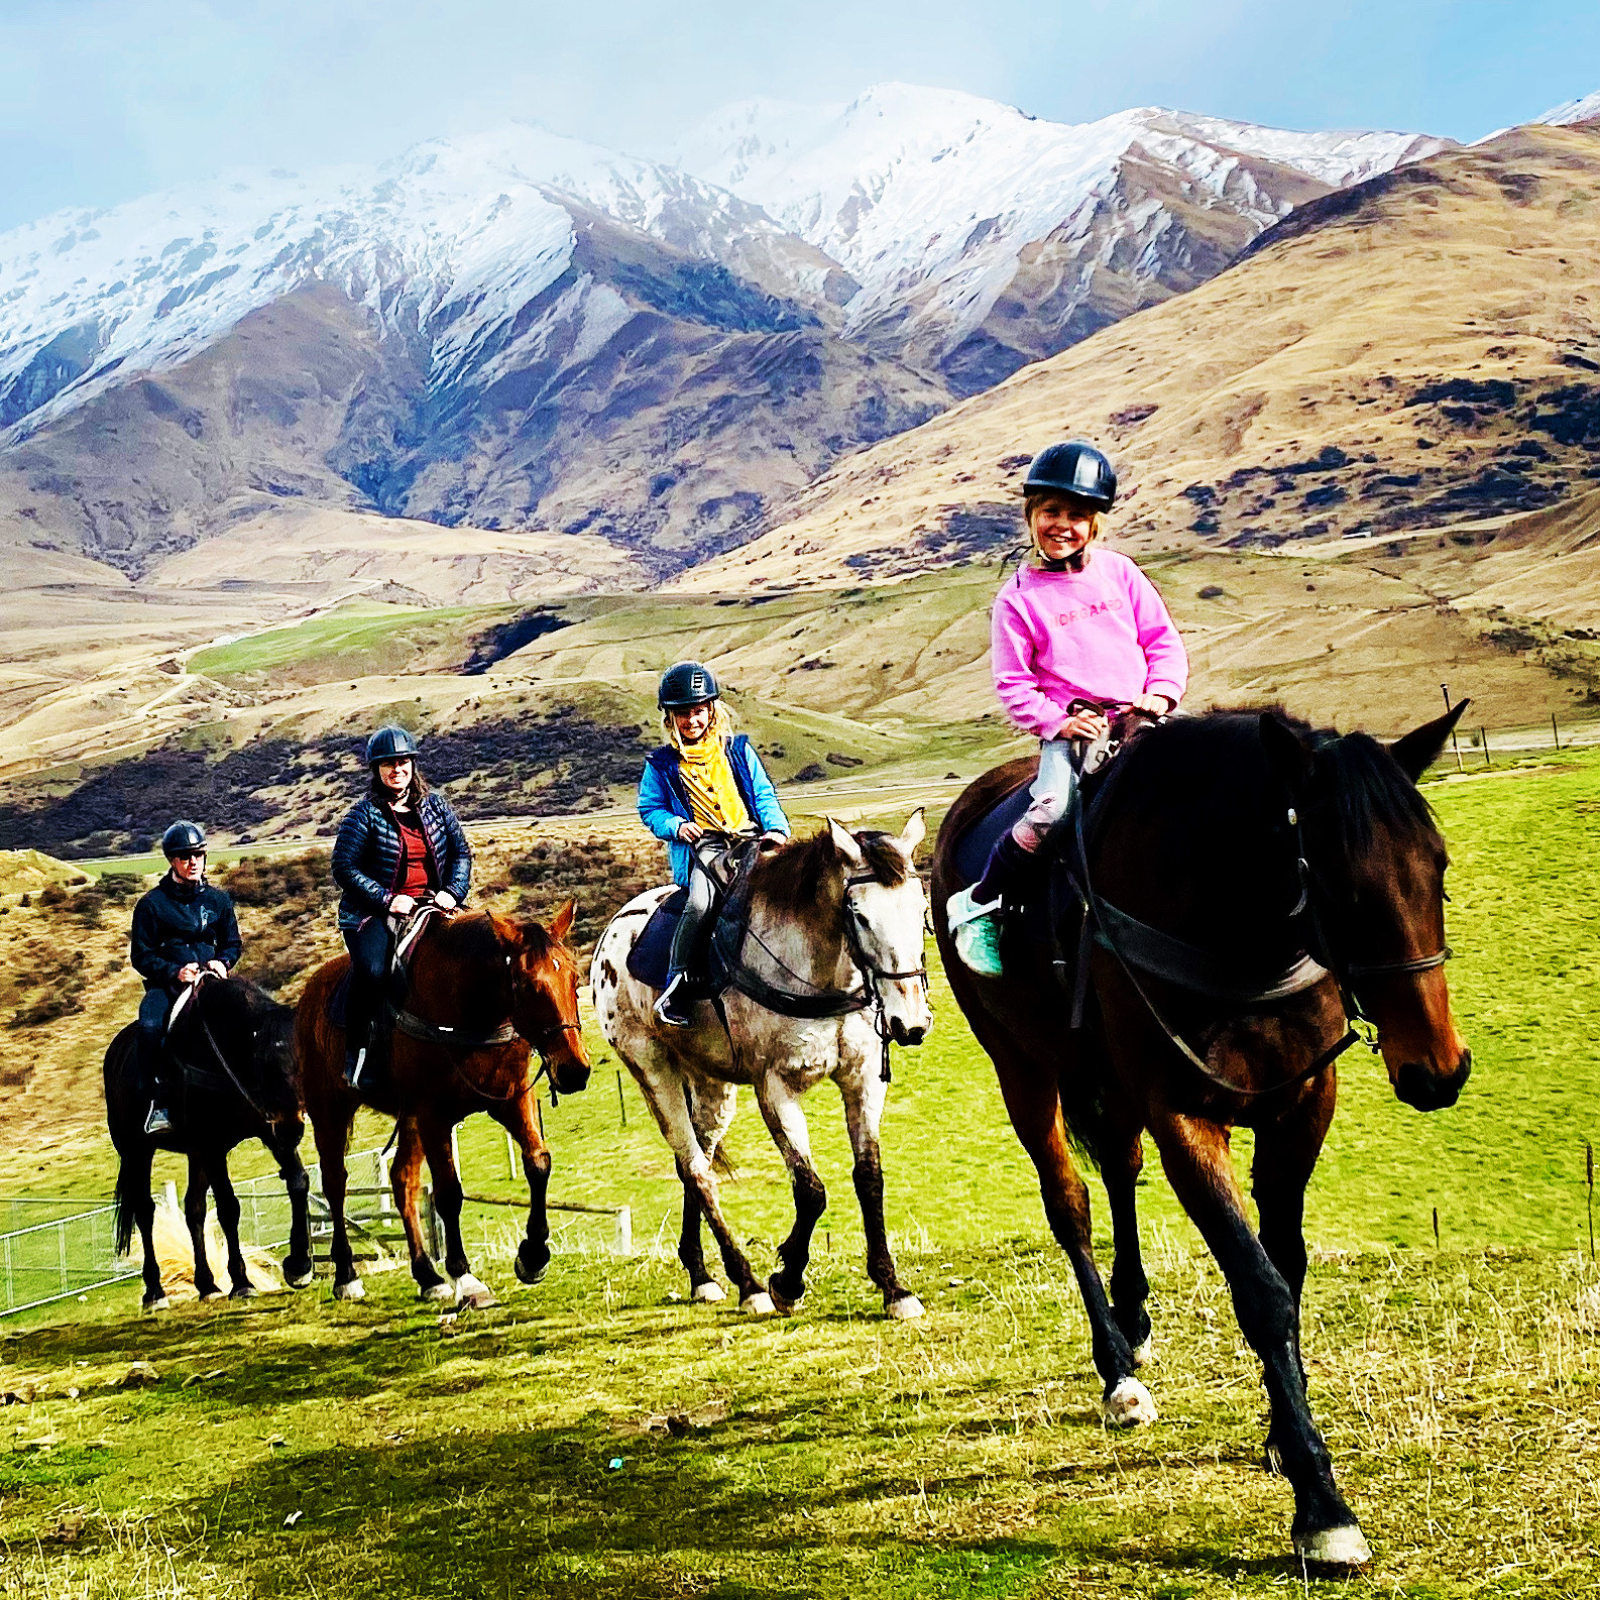 School Holiday Family Fun Beyond the Slopes: Horse Trekking and Quad Biking at The Cardrona Horse Riding & 4×4 ATVs